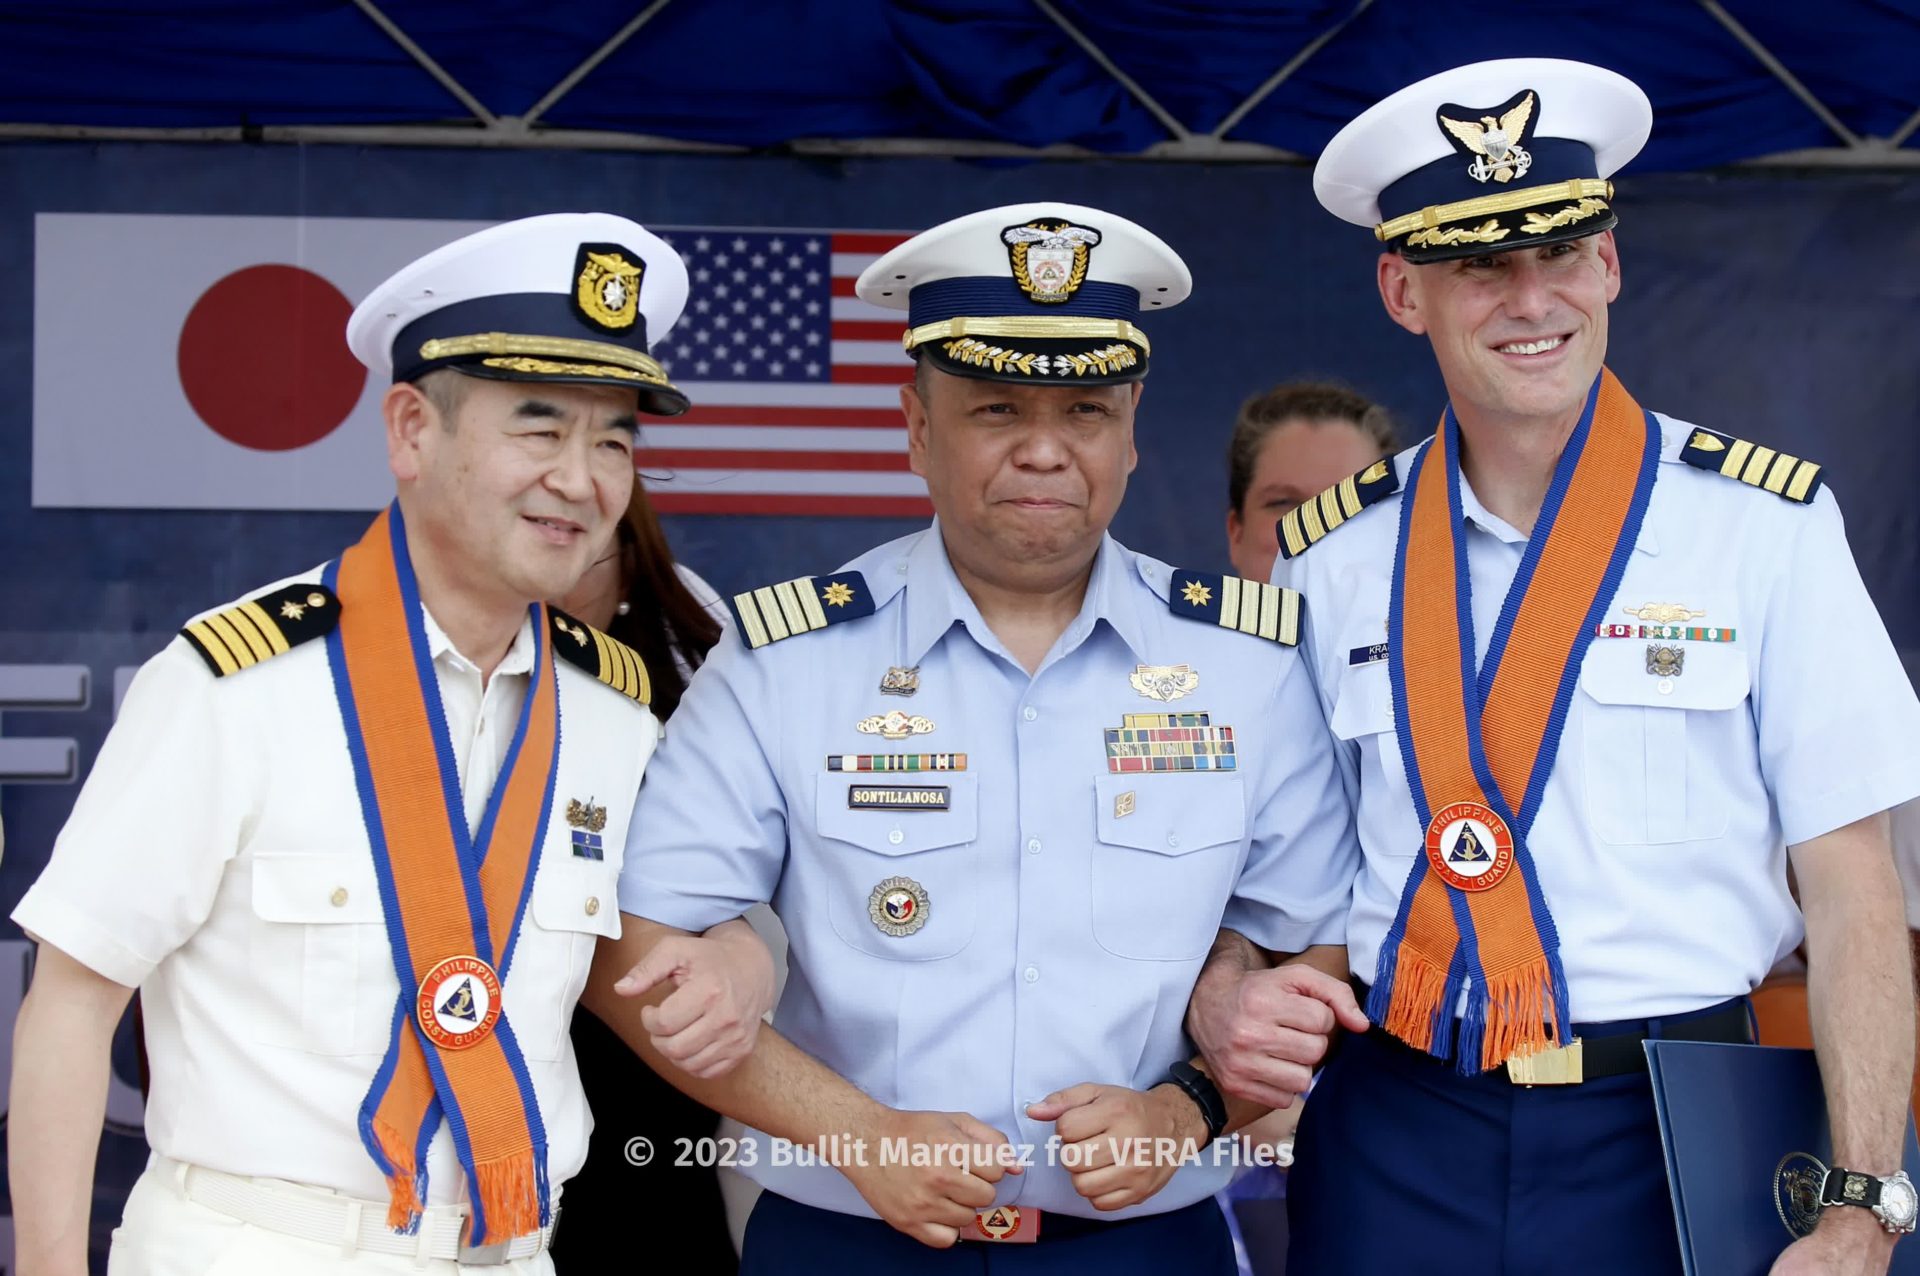 060123 Japan US Coast Guard in PH 10/11 Photo by Bullit Marquez